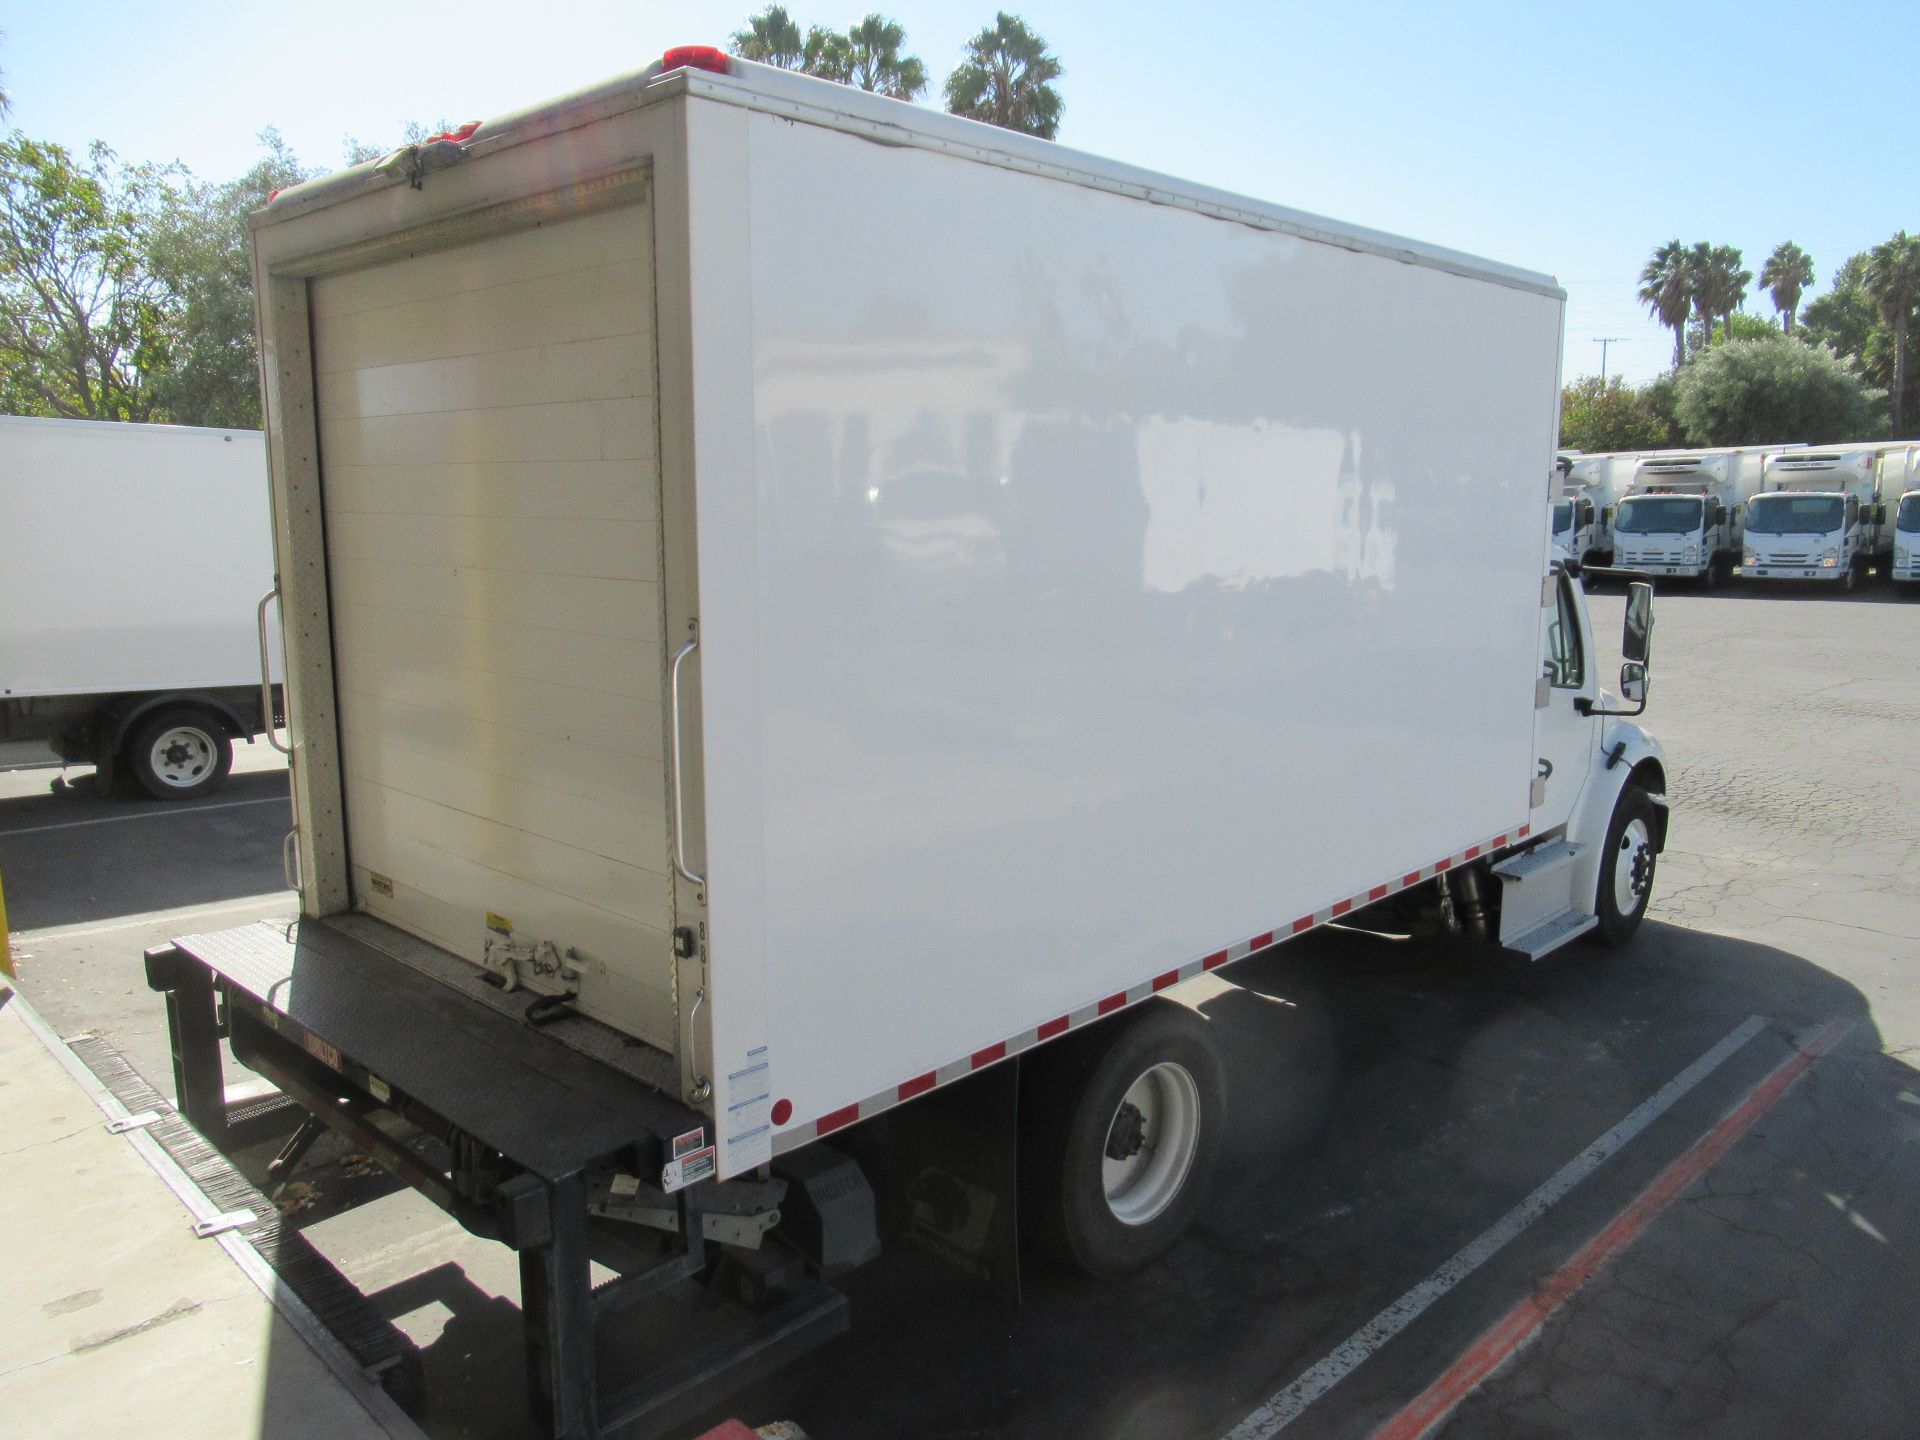 2015 Freightliner refrigerated truck - Image 4 of 9